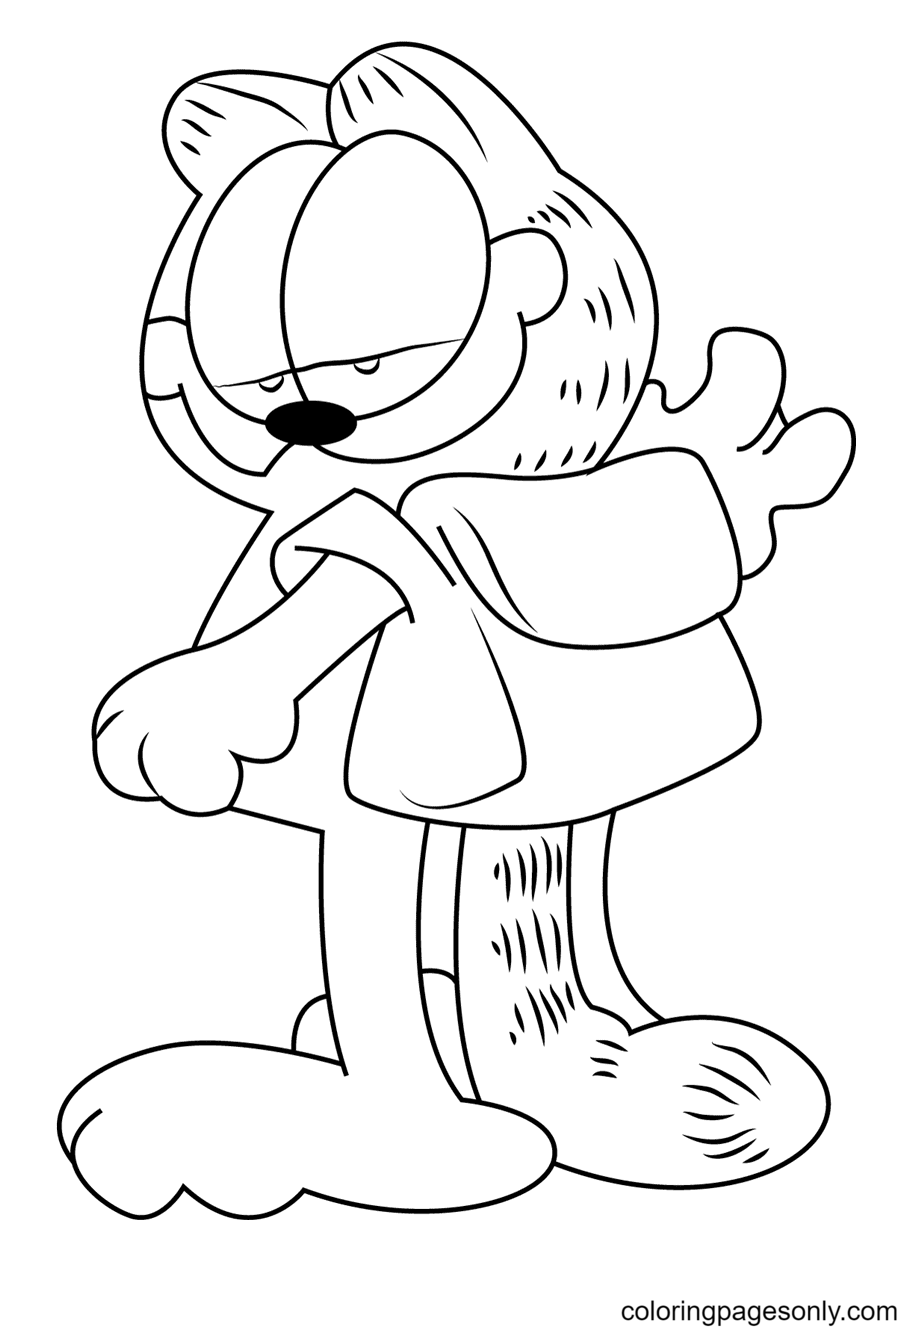 Garfield Looking You Coloring Page